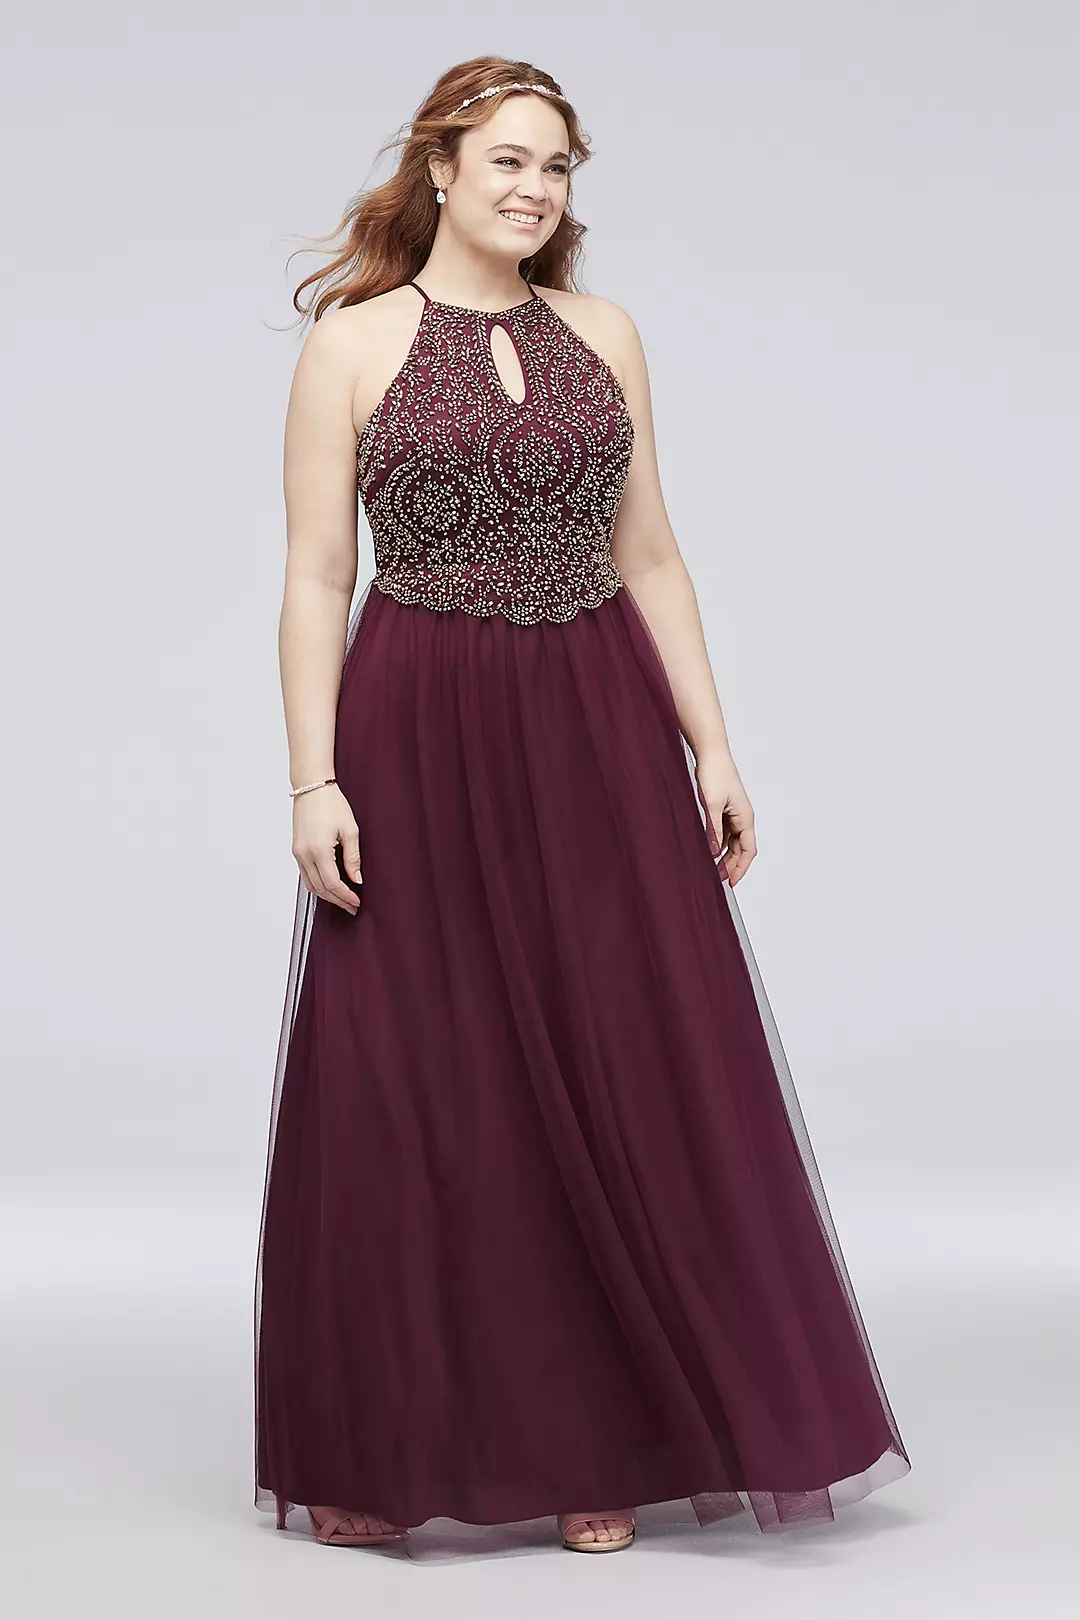 Metallic Beaded Plus Size High-Neck Ball Gown Image